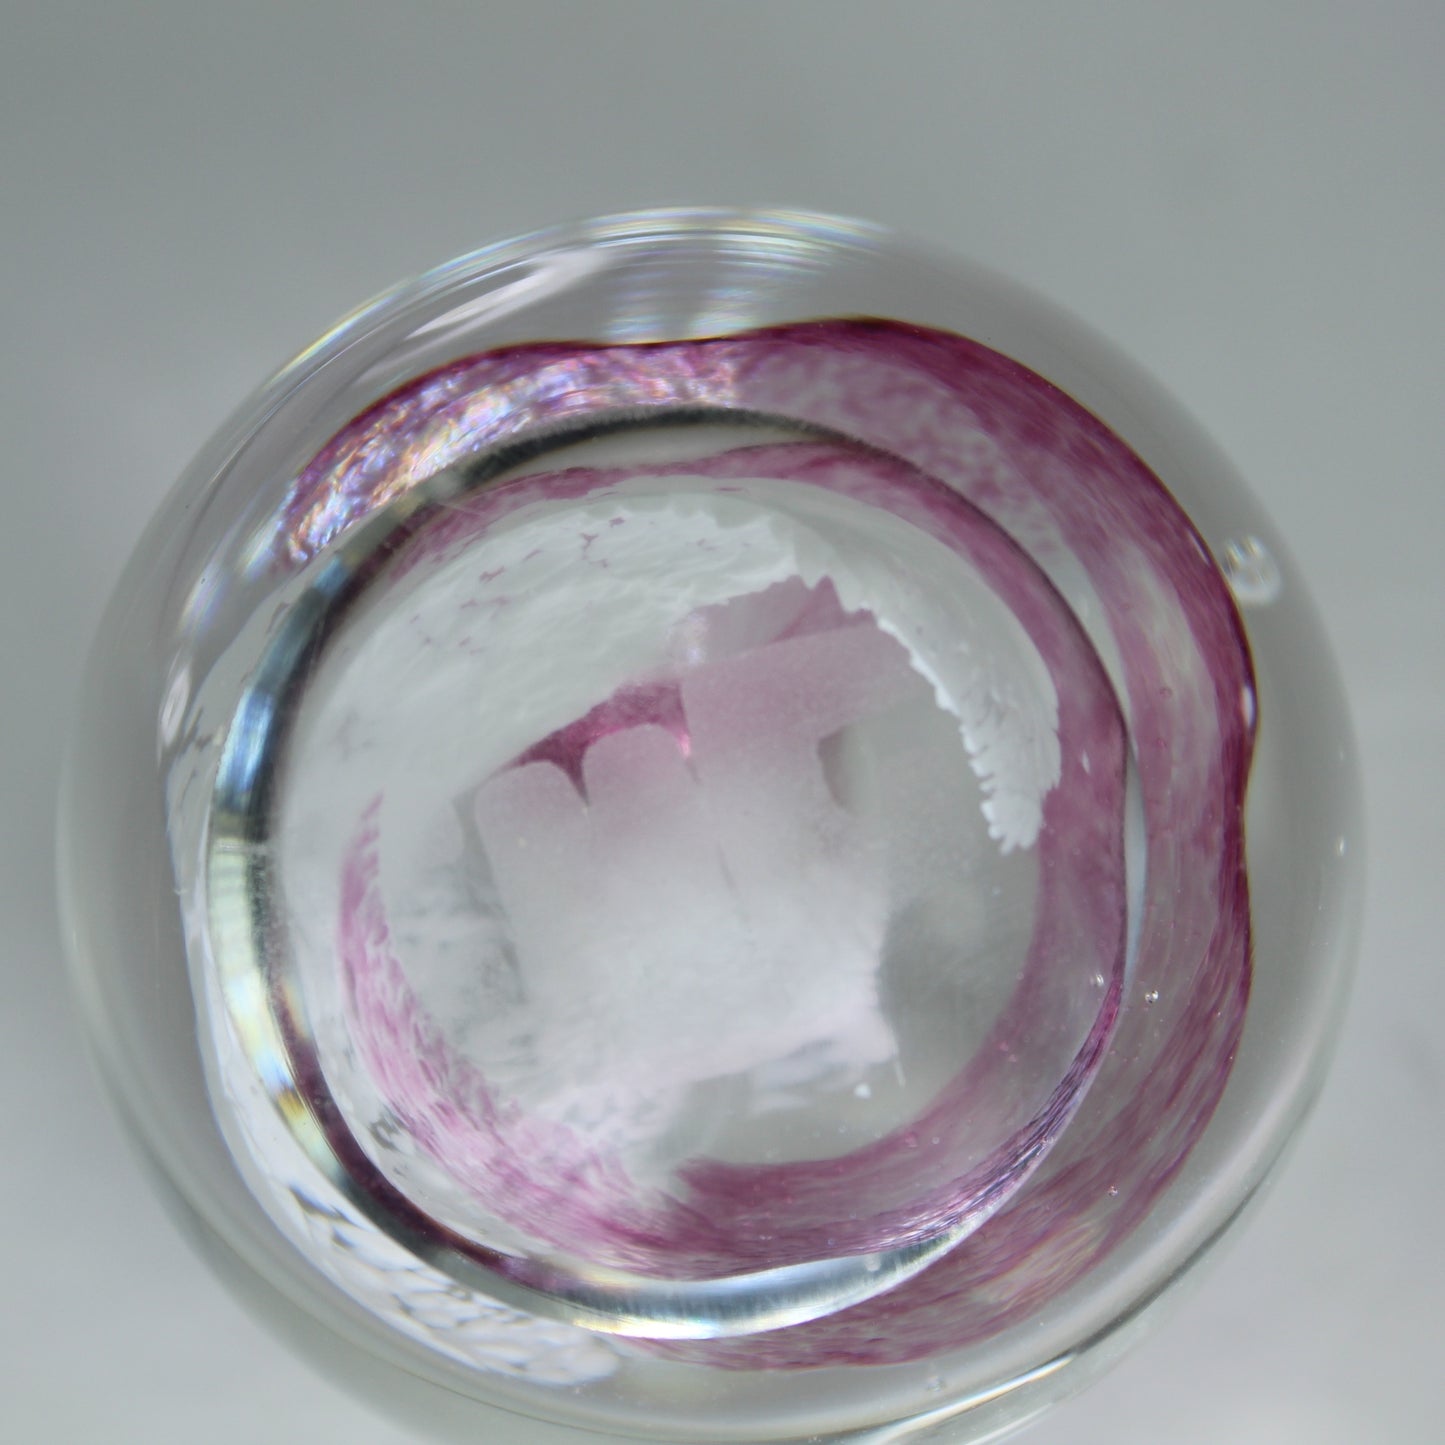 Paperweight Control Bubble Marked CllG Pink Rose White Fantasy